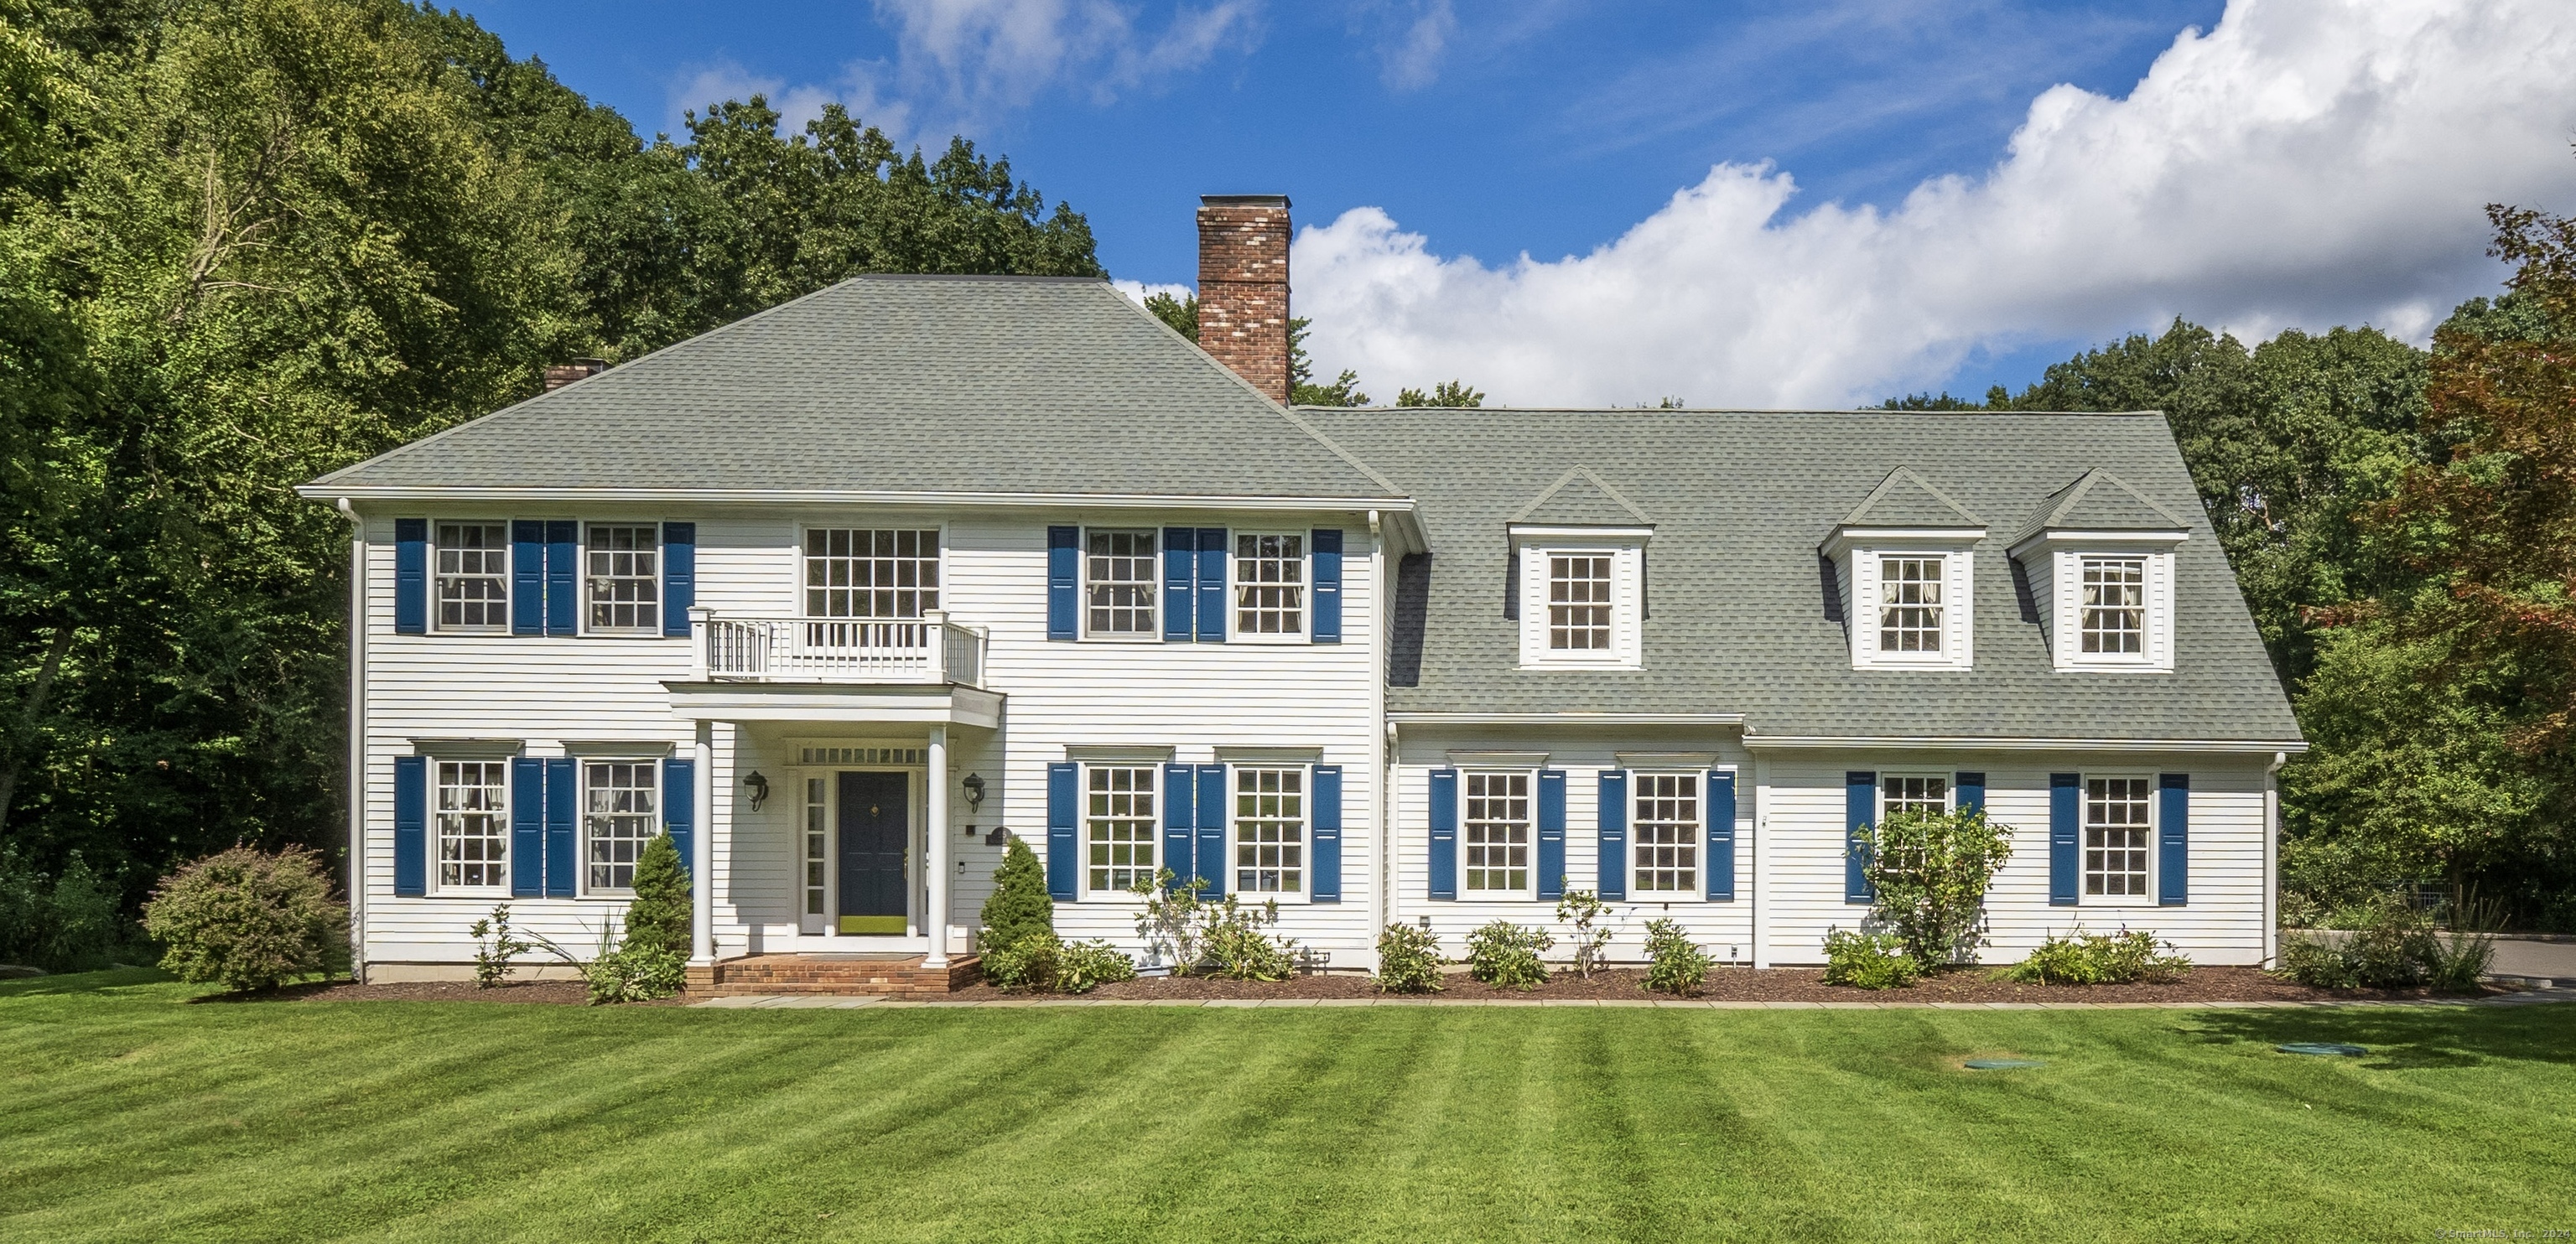 This stately colonial in prestigious Easton Woods offers endless opportunities year-round to entertain, relax and create memories. The 9+ ft ceilings give the first floor an open airy feel. Gather around the kitchen island, enjoy a fire in the family room or dine al fresco on the deck overlooking the expansive back yard. The oversized living room and dining room can easily accommodate holiday gatherings. Not to be missed is the optional first floor bedroom with full bath or perfect home office.  The second level features an inviting primary suite with fireplace and bathroom with 2 walk in closets. Three additional bedrooms and 2 full baths complete the upstairs. The finished walk out lower level not only has a home gym area, but a handsome wet bar and fireplace, an ideal spot for viewing favorite movies or sporting events.  Summer....move the activities outside with a swim in the heated pool, a game of horseshoes or a refreshment at the cabana bar. Whatever the weather, this home checks all the boxes.